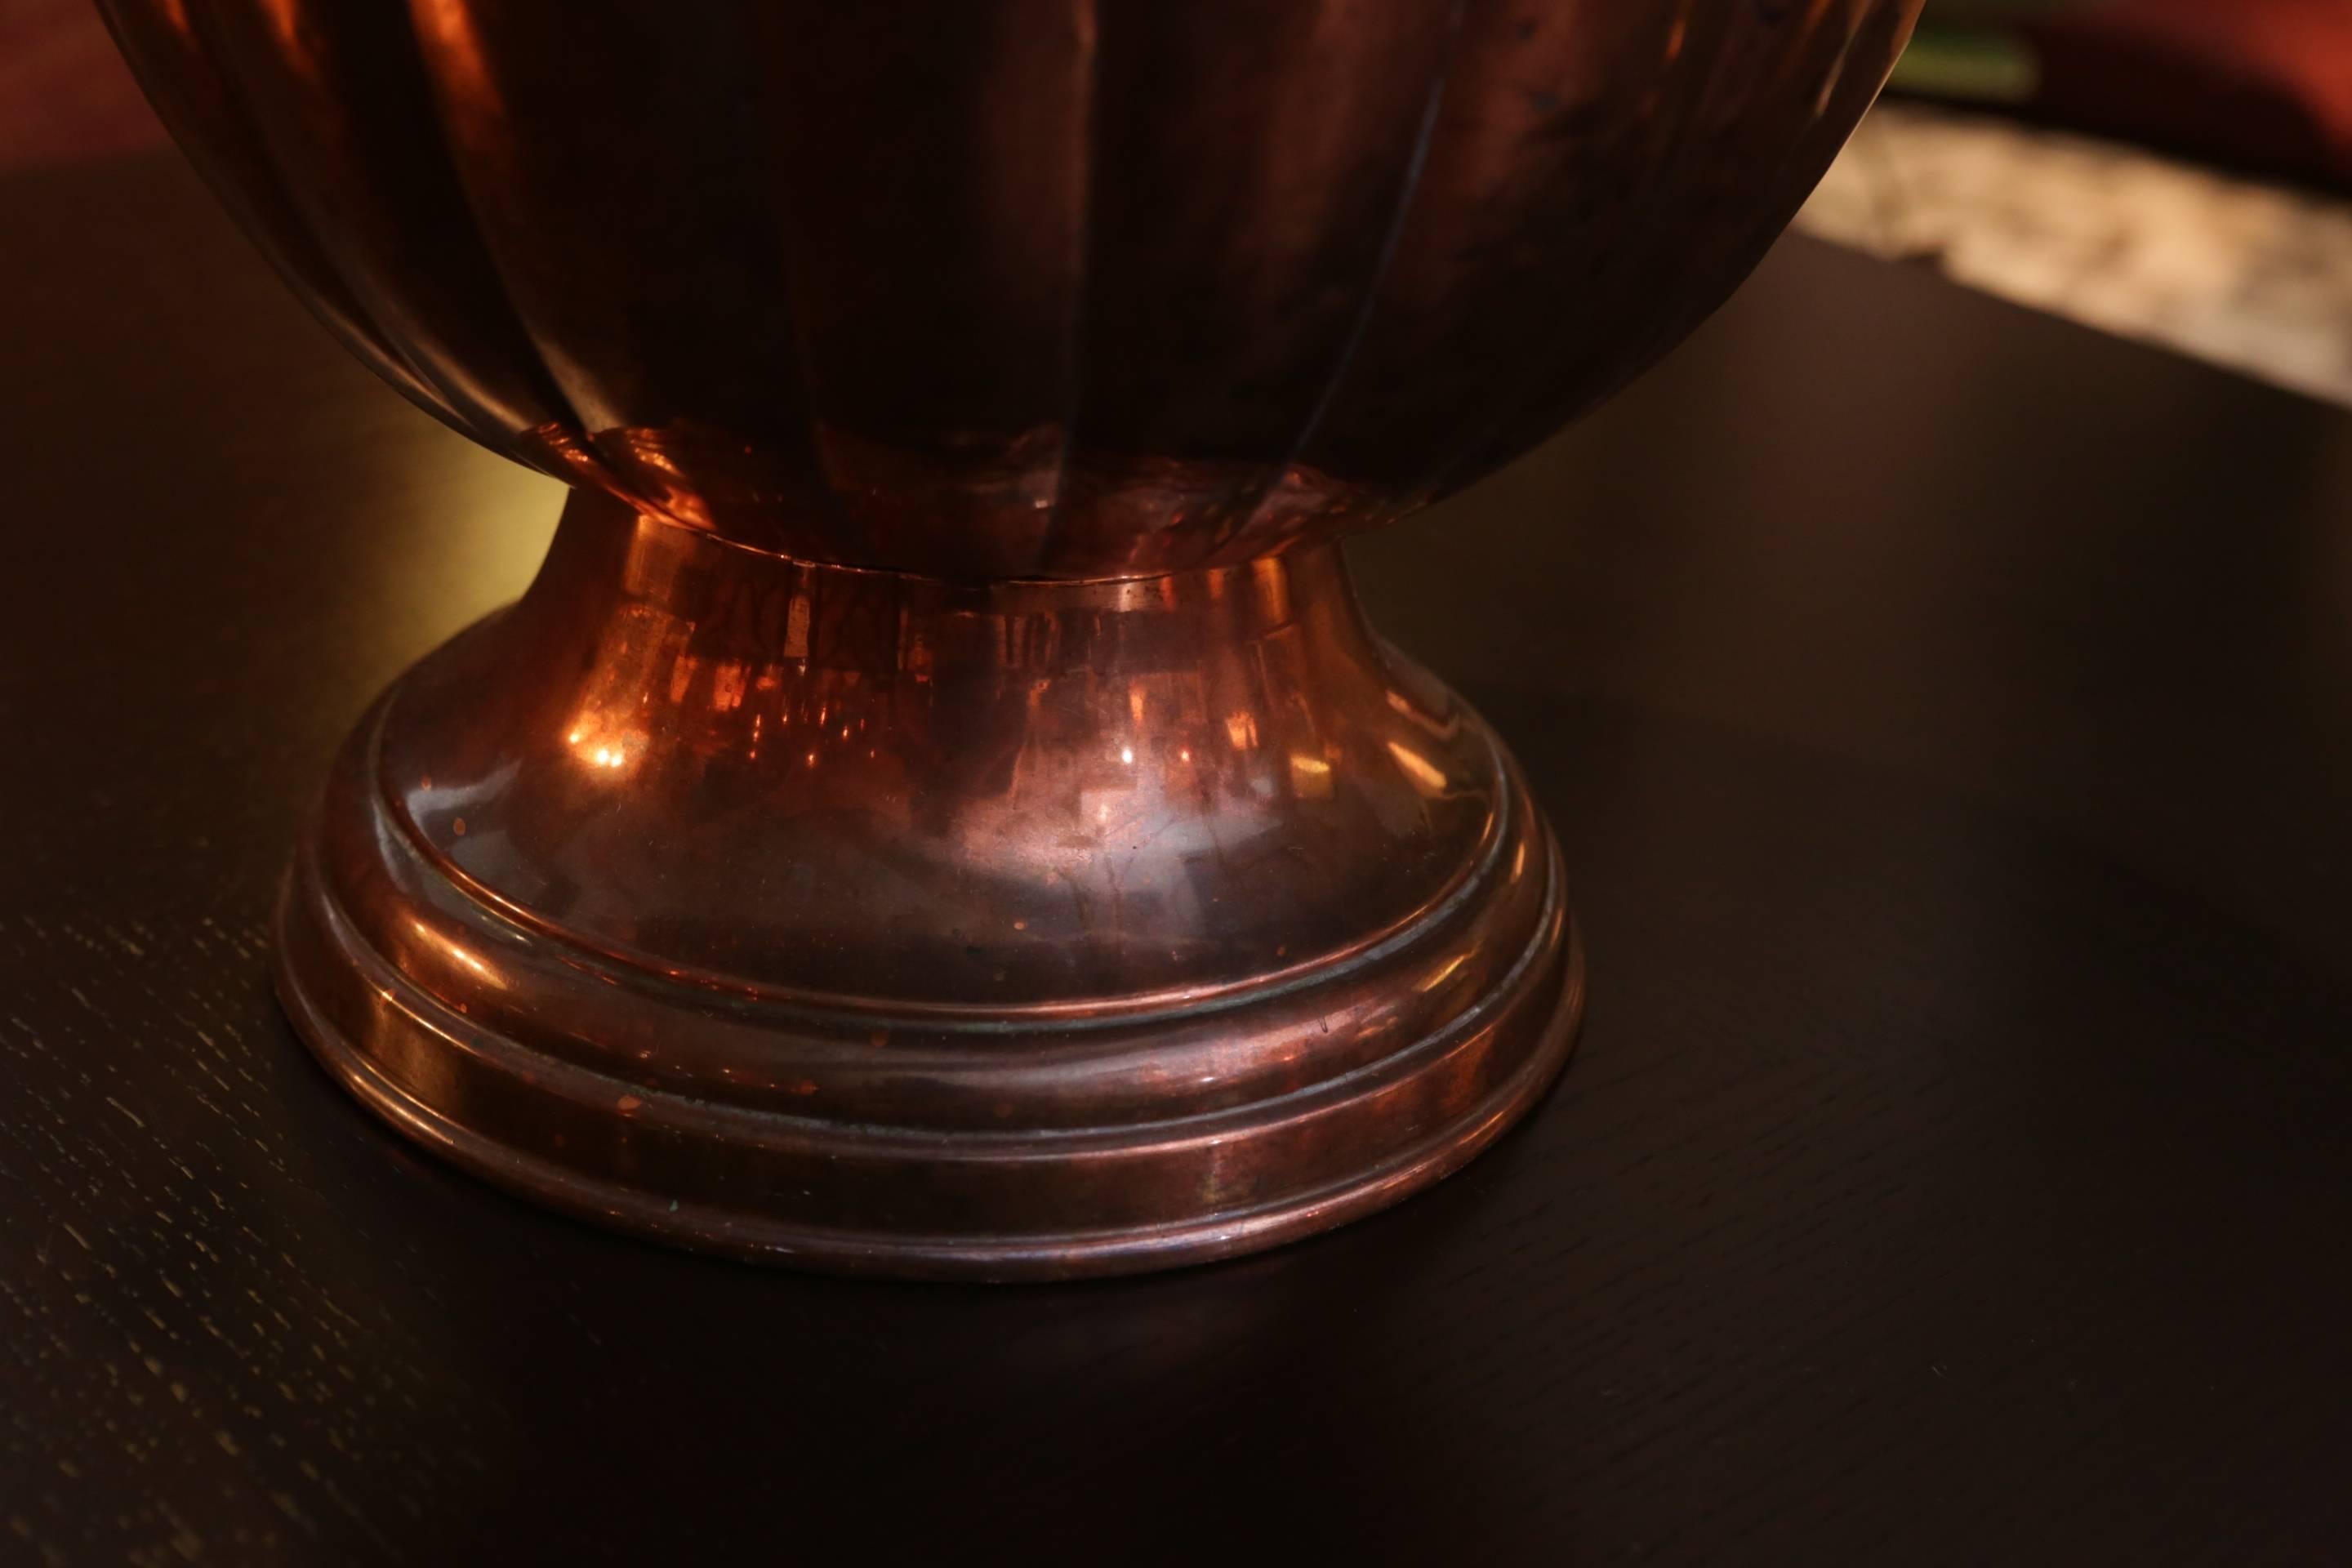 19th century copper coal bin with lid. Fluted-shaped acorn top with braided iron handle. Would work fabulously as a wine cooler or simply as an objet d'art.